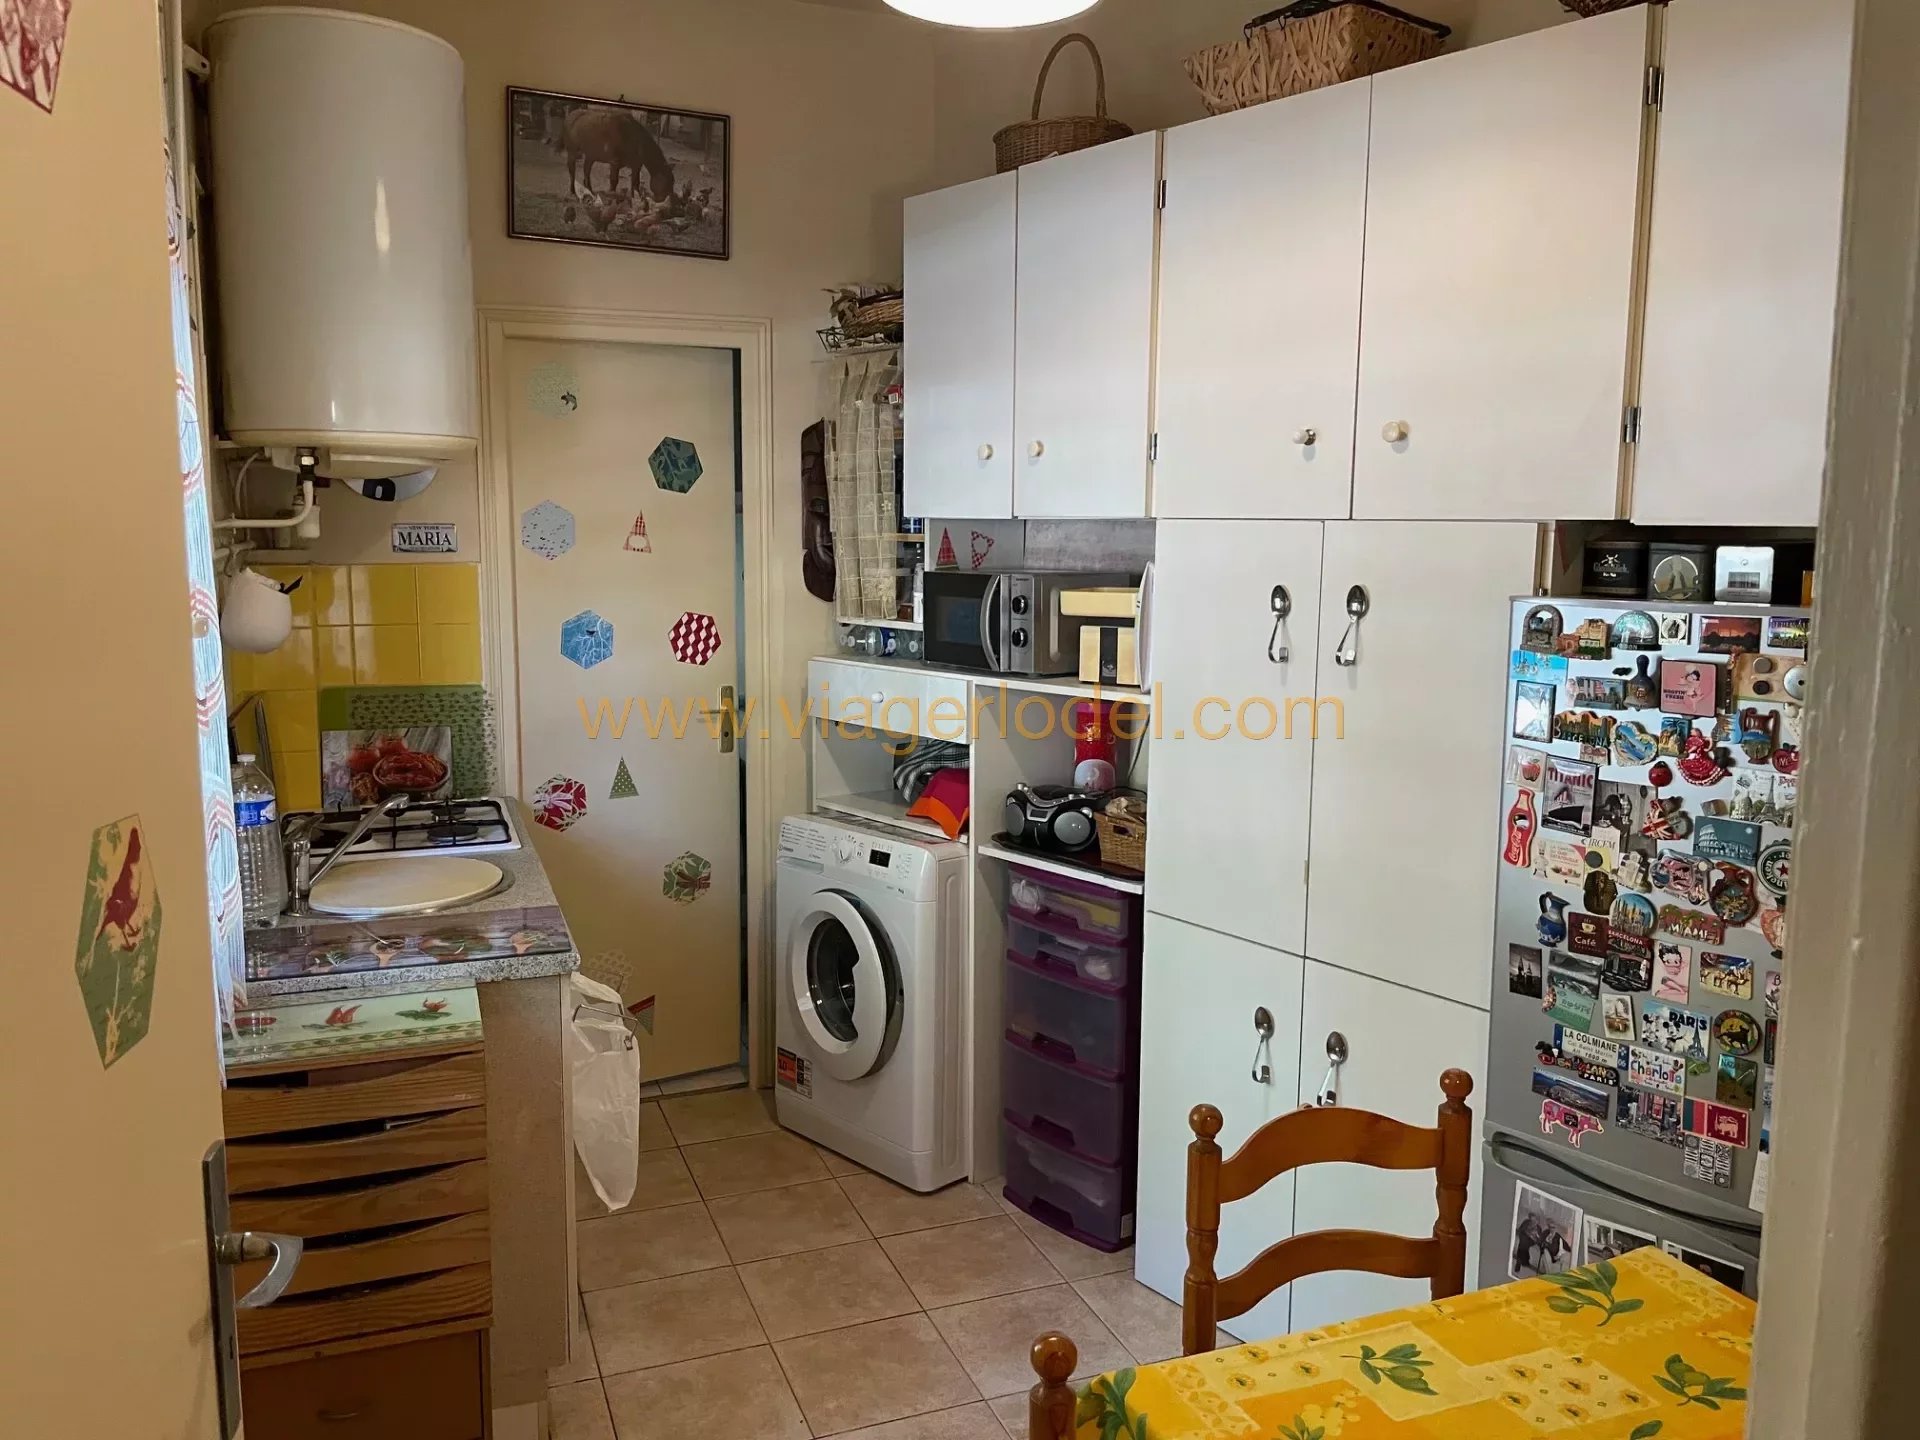 Réf. annonce : 9520 - VIAGER OCCUPE - NICE (06)